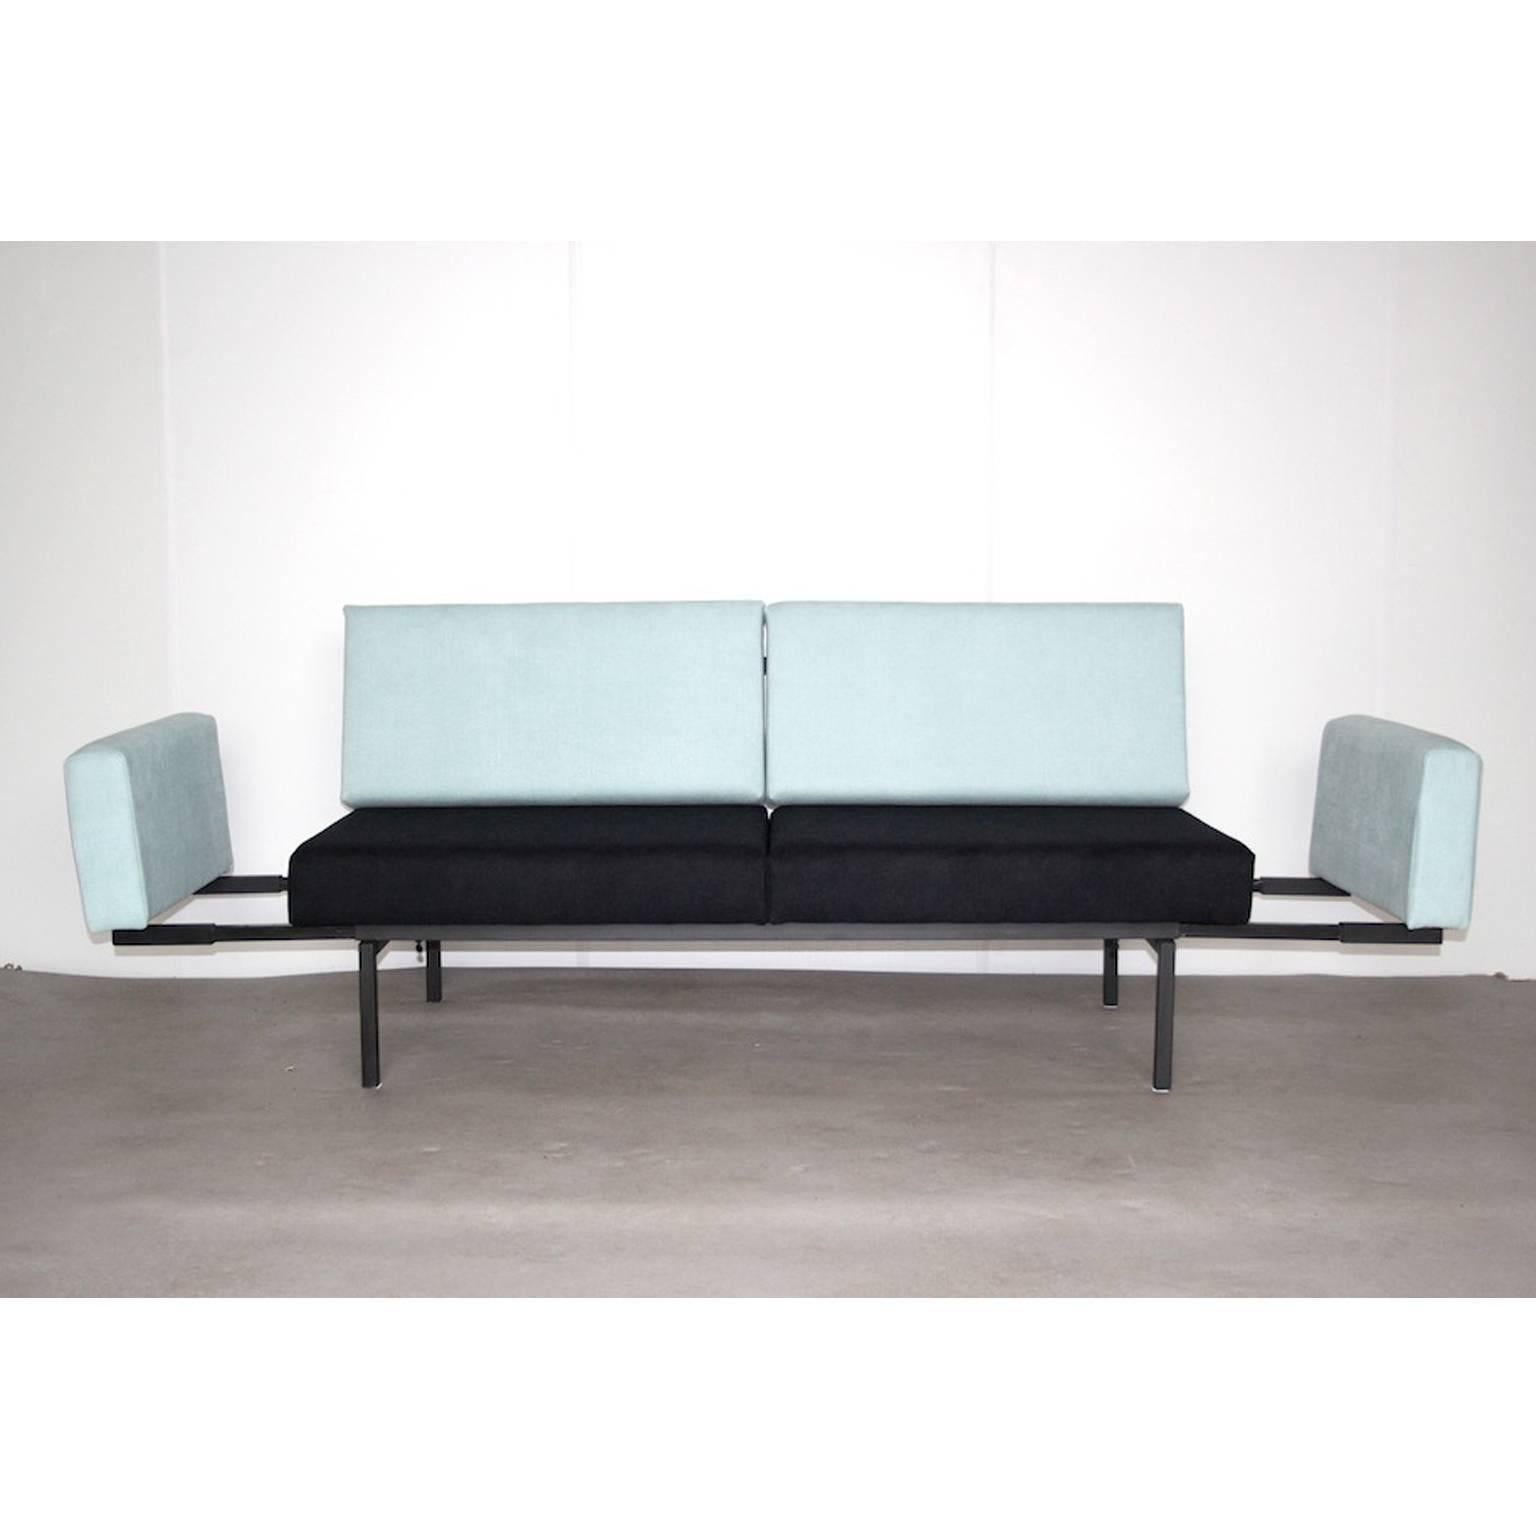 Sofa or Daybed by Coen de Vries for Devo, Dutch Design, 1952 For Sale 1